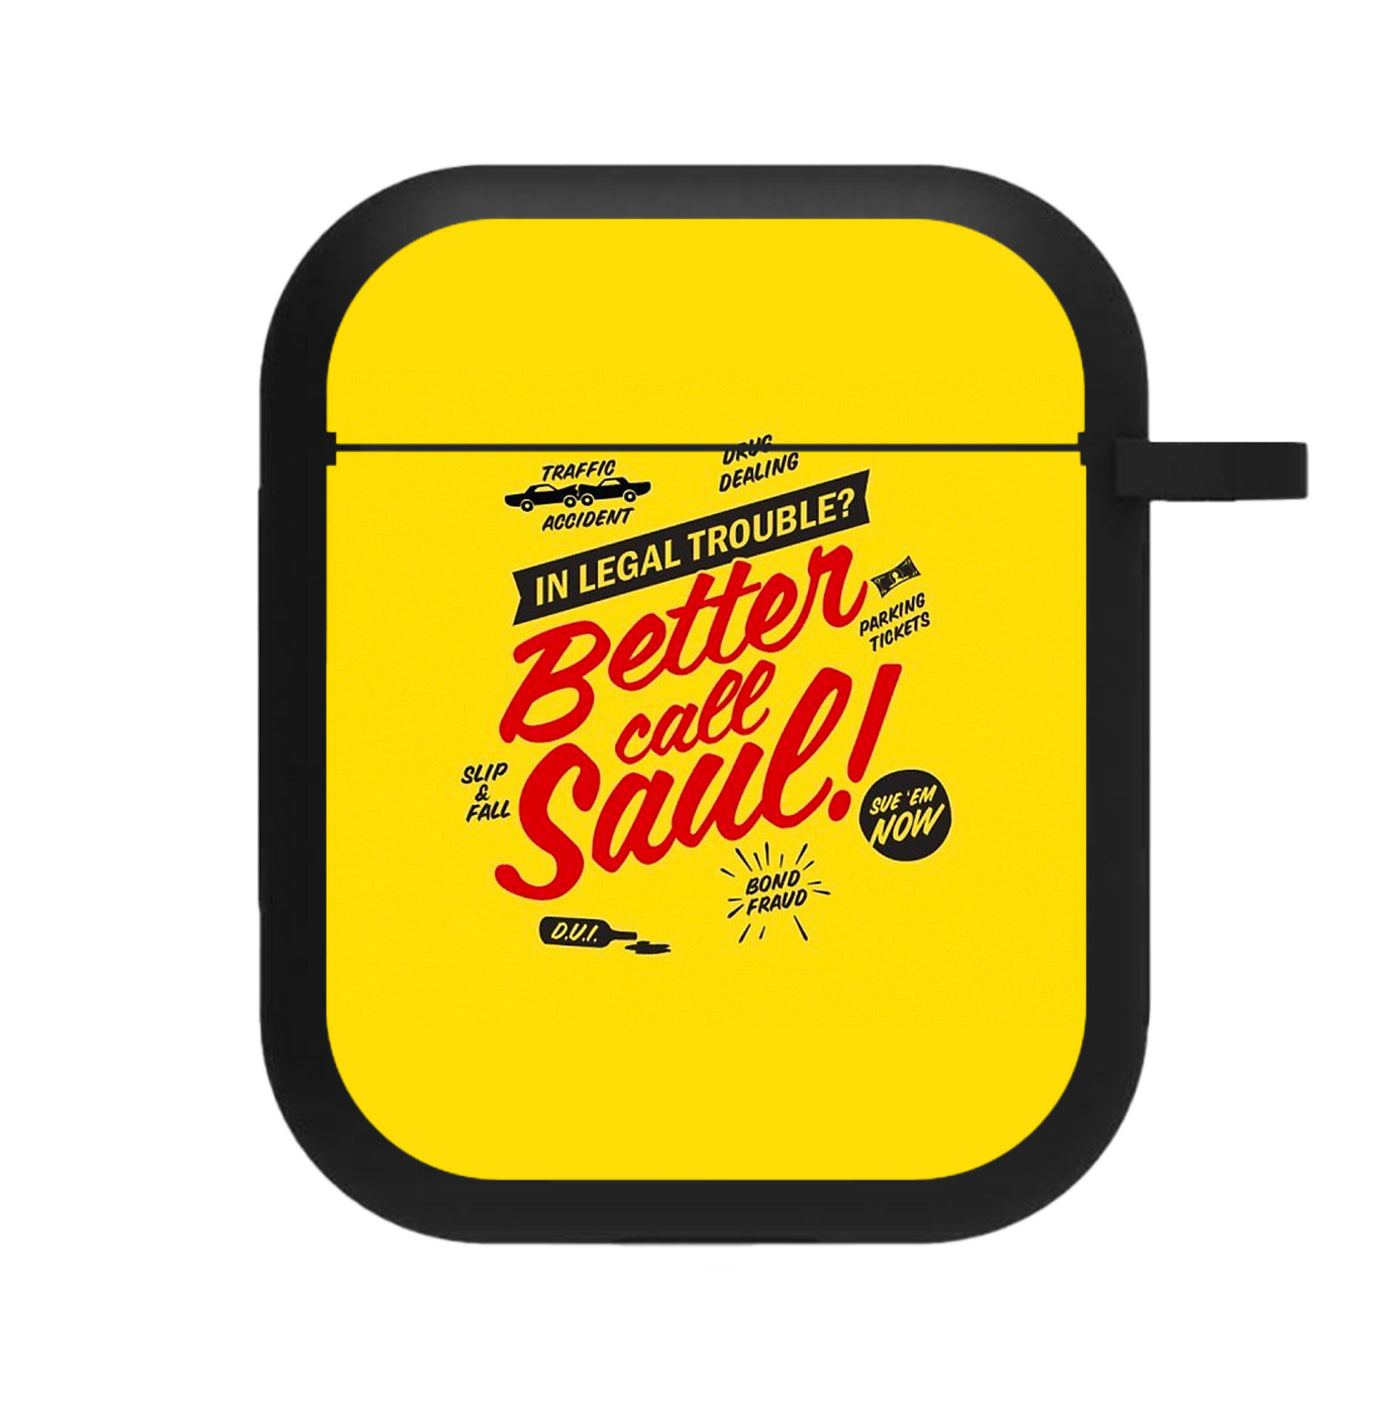 In Legal Trouble? Better Call Saul AirPods Case